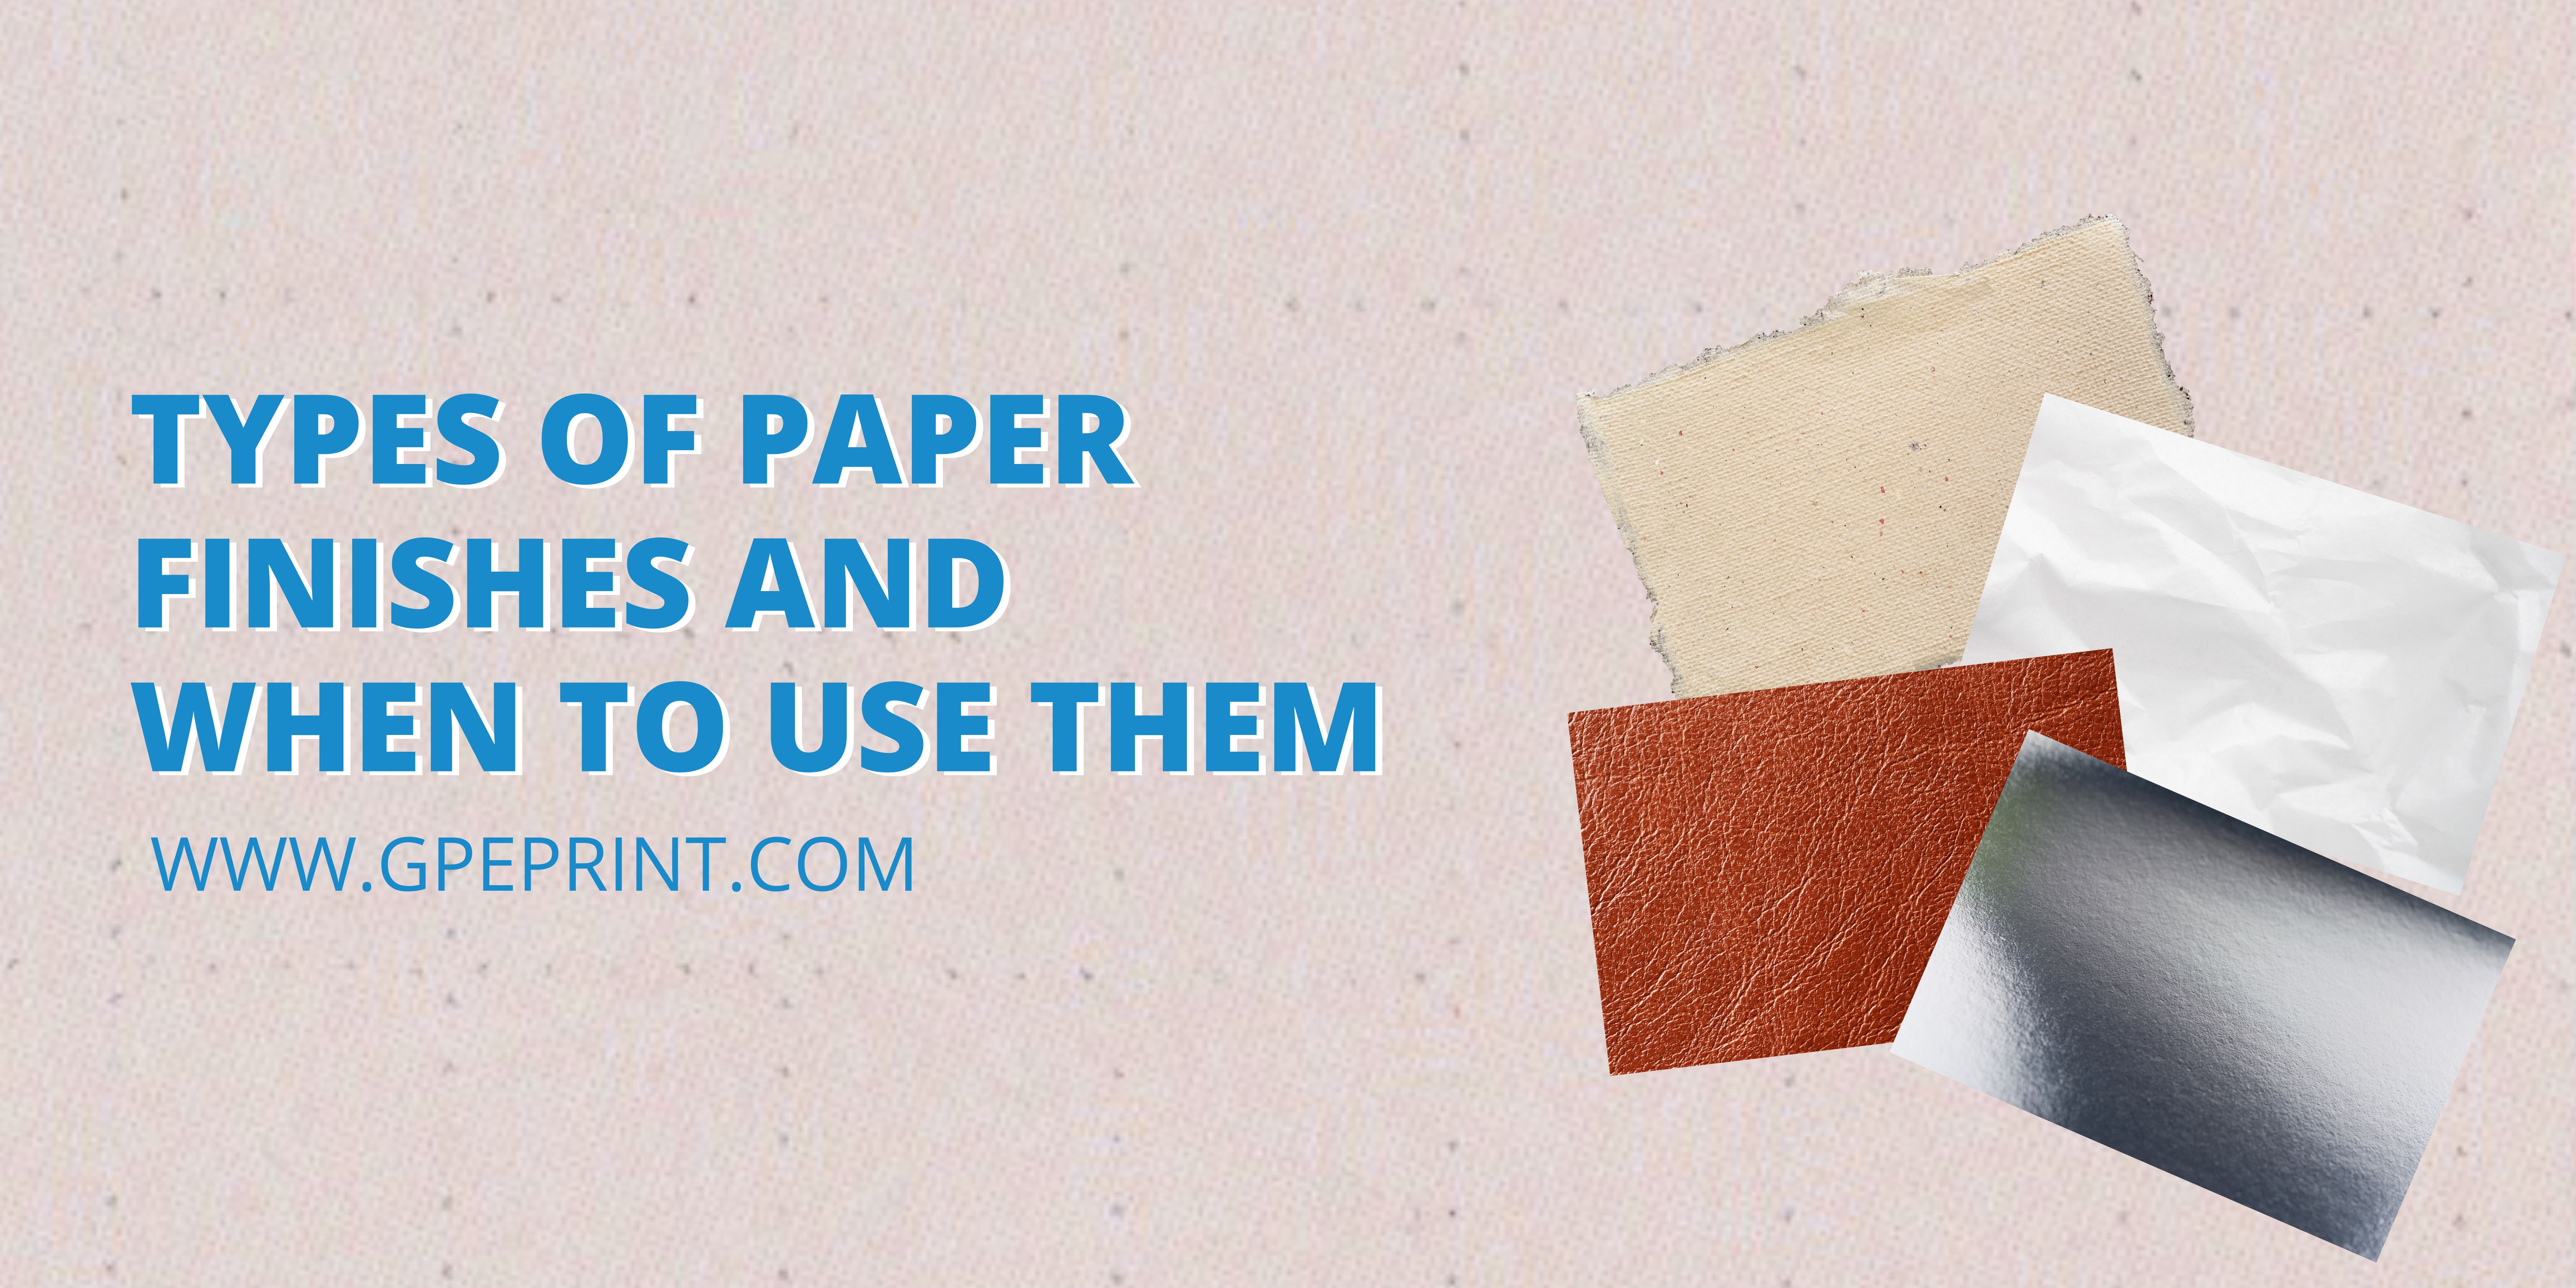 Types of Paper Finishes and When To Use Them